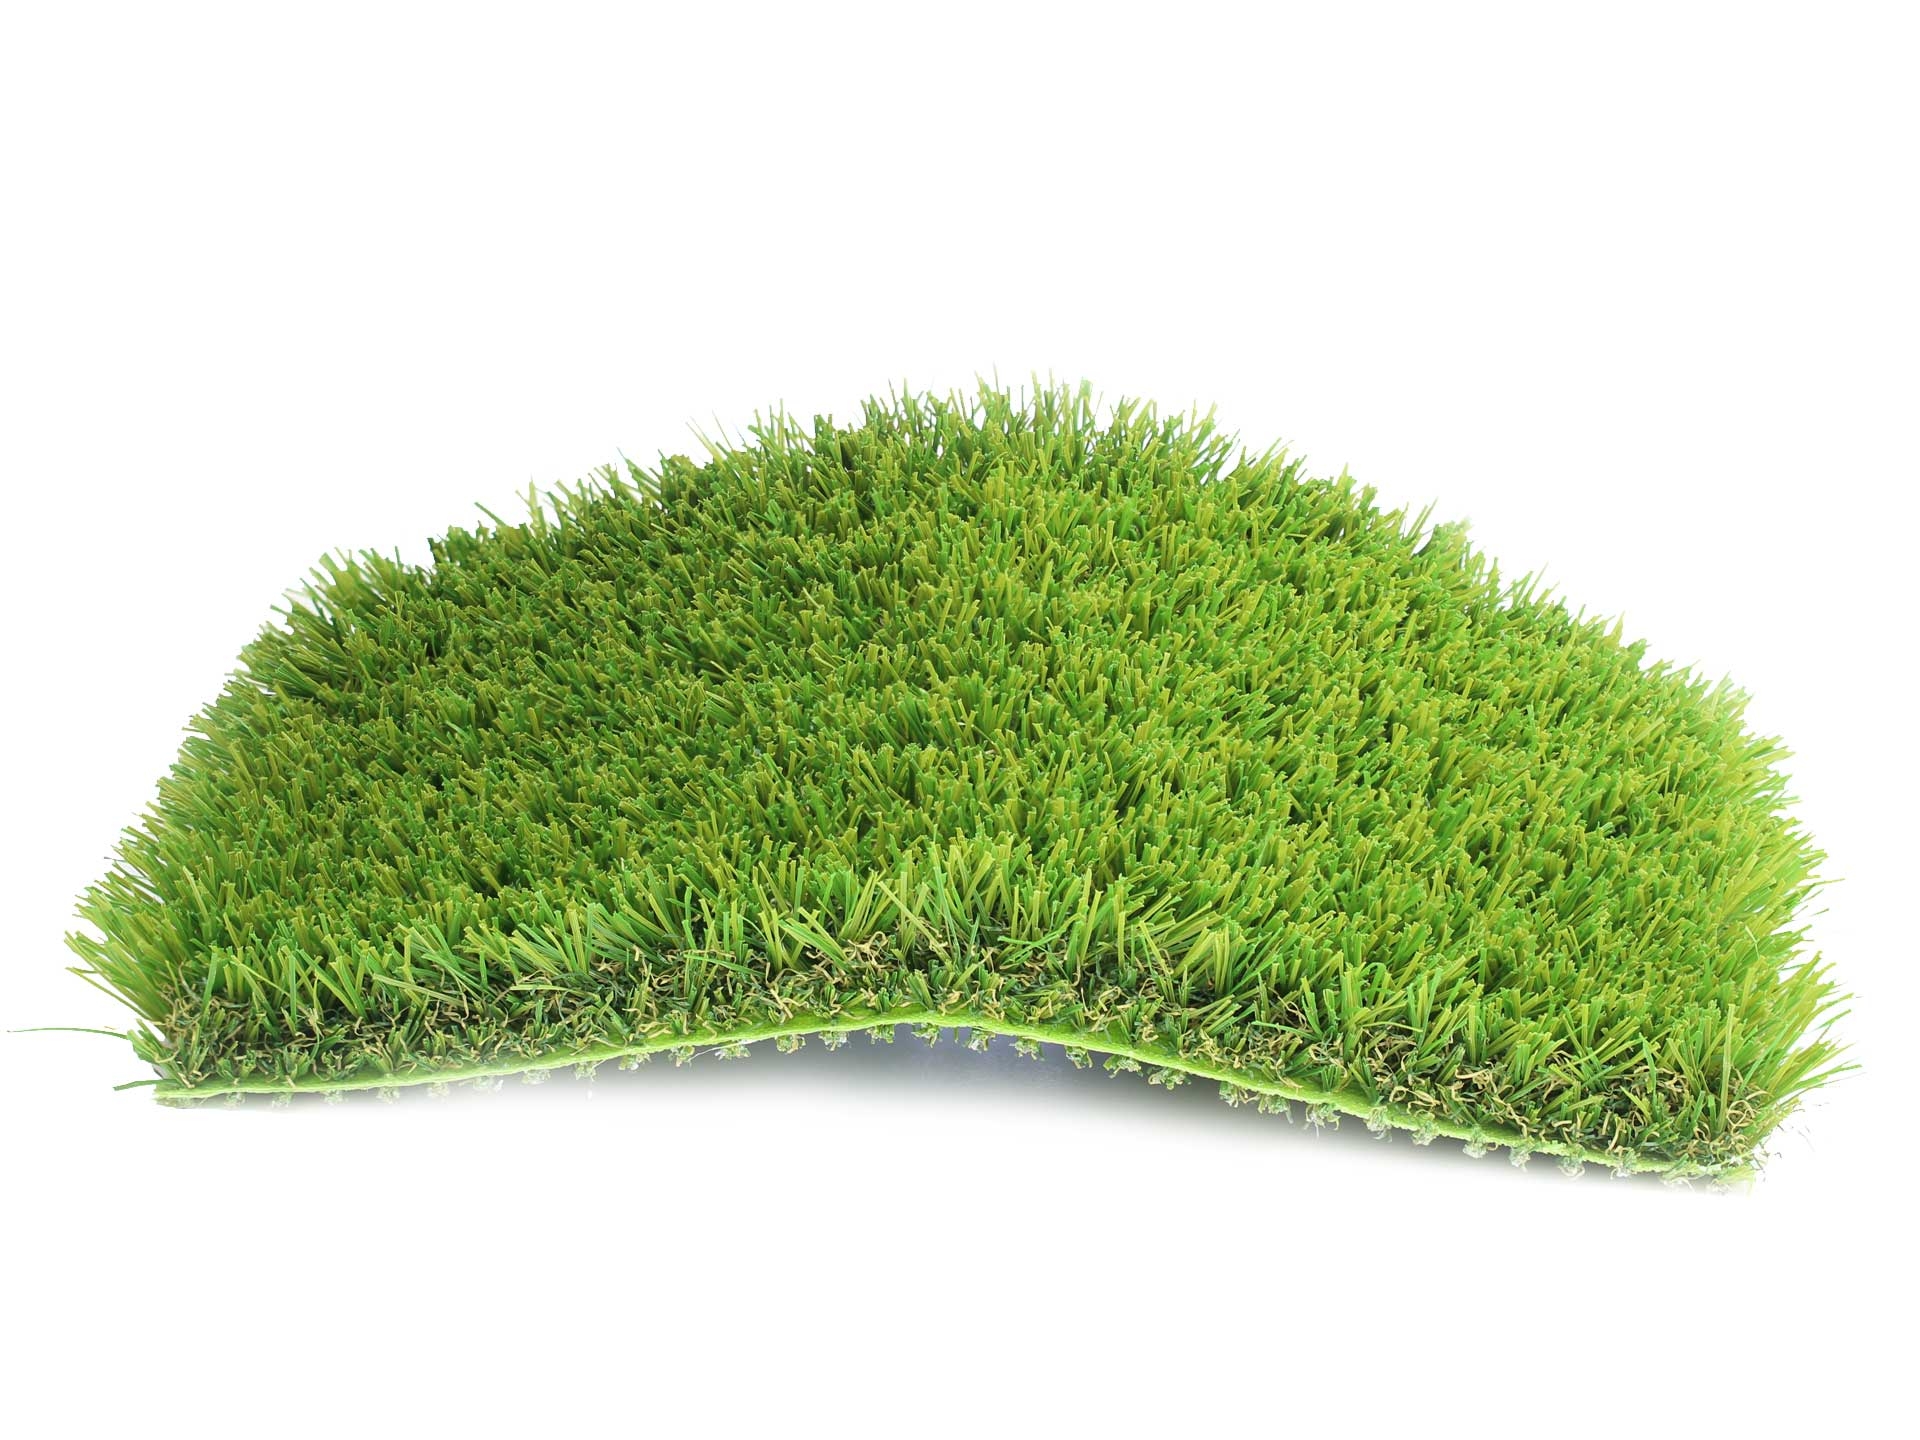 Full Recycle-60 artificial grass